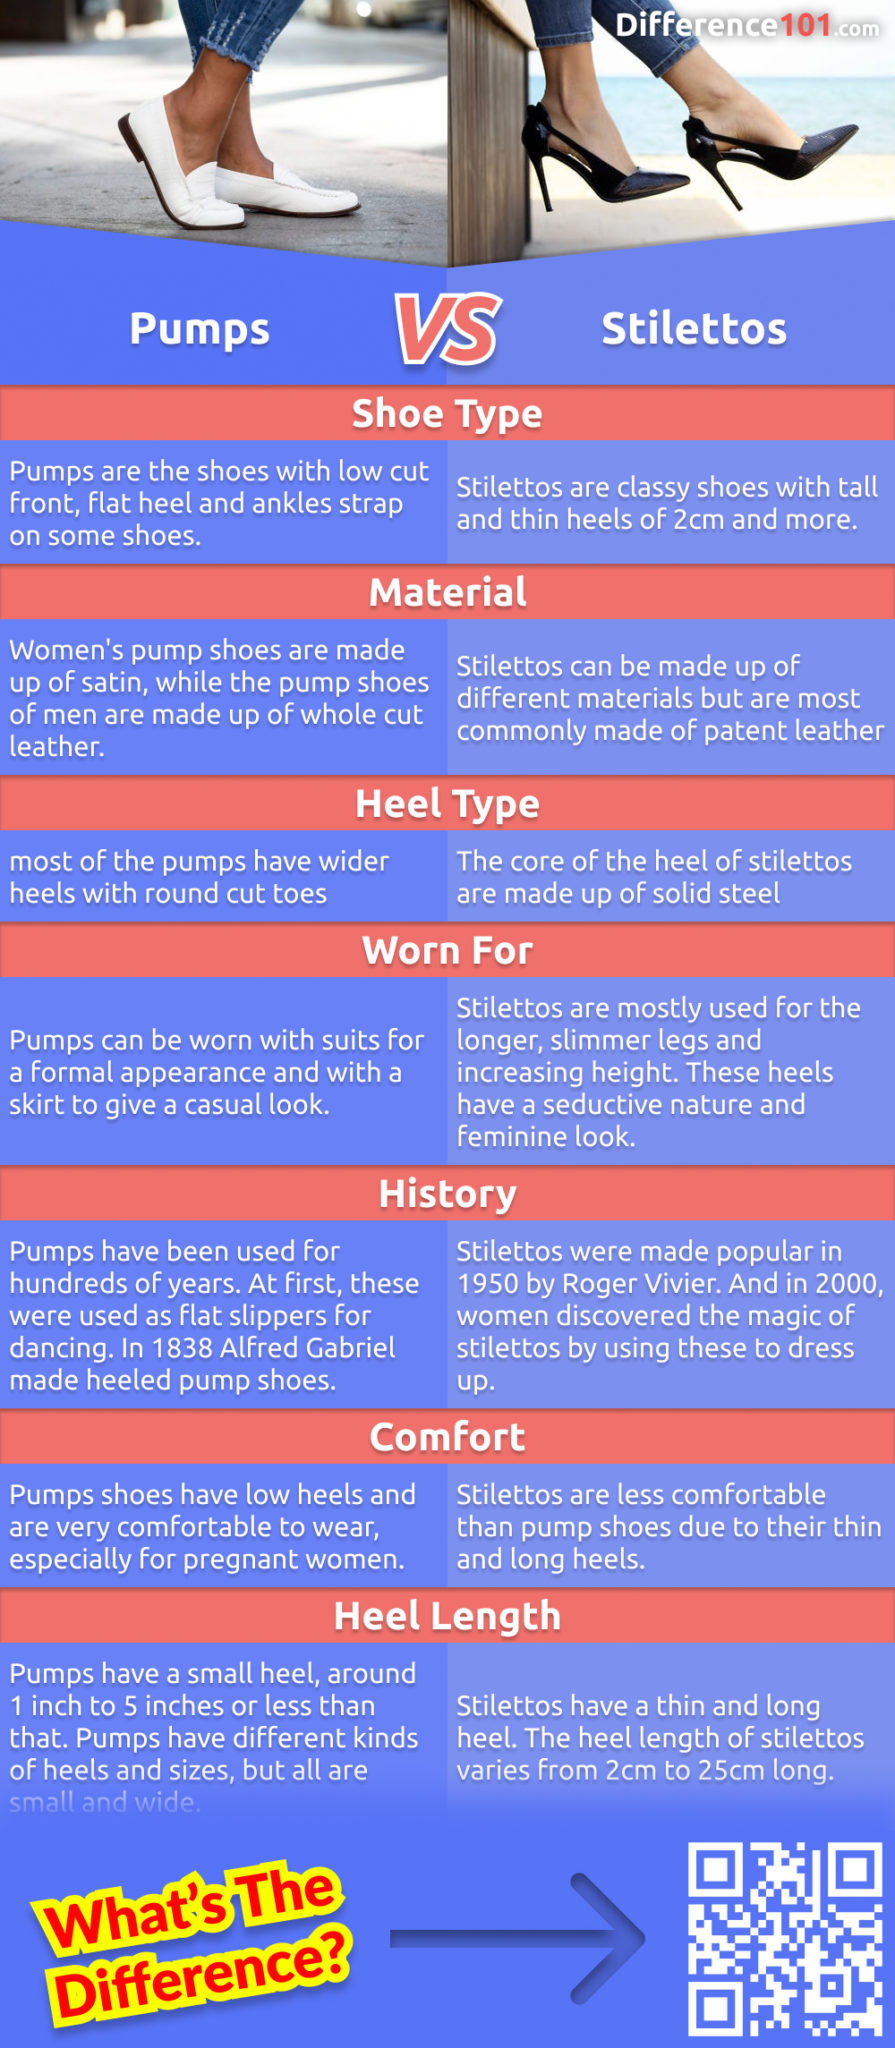 Pumps and stilettos are very different types of women's shoes, and they both have their own advantages. Read this article to find out which shoe is the best for you